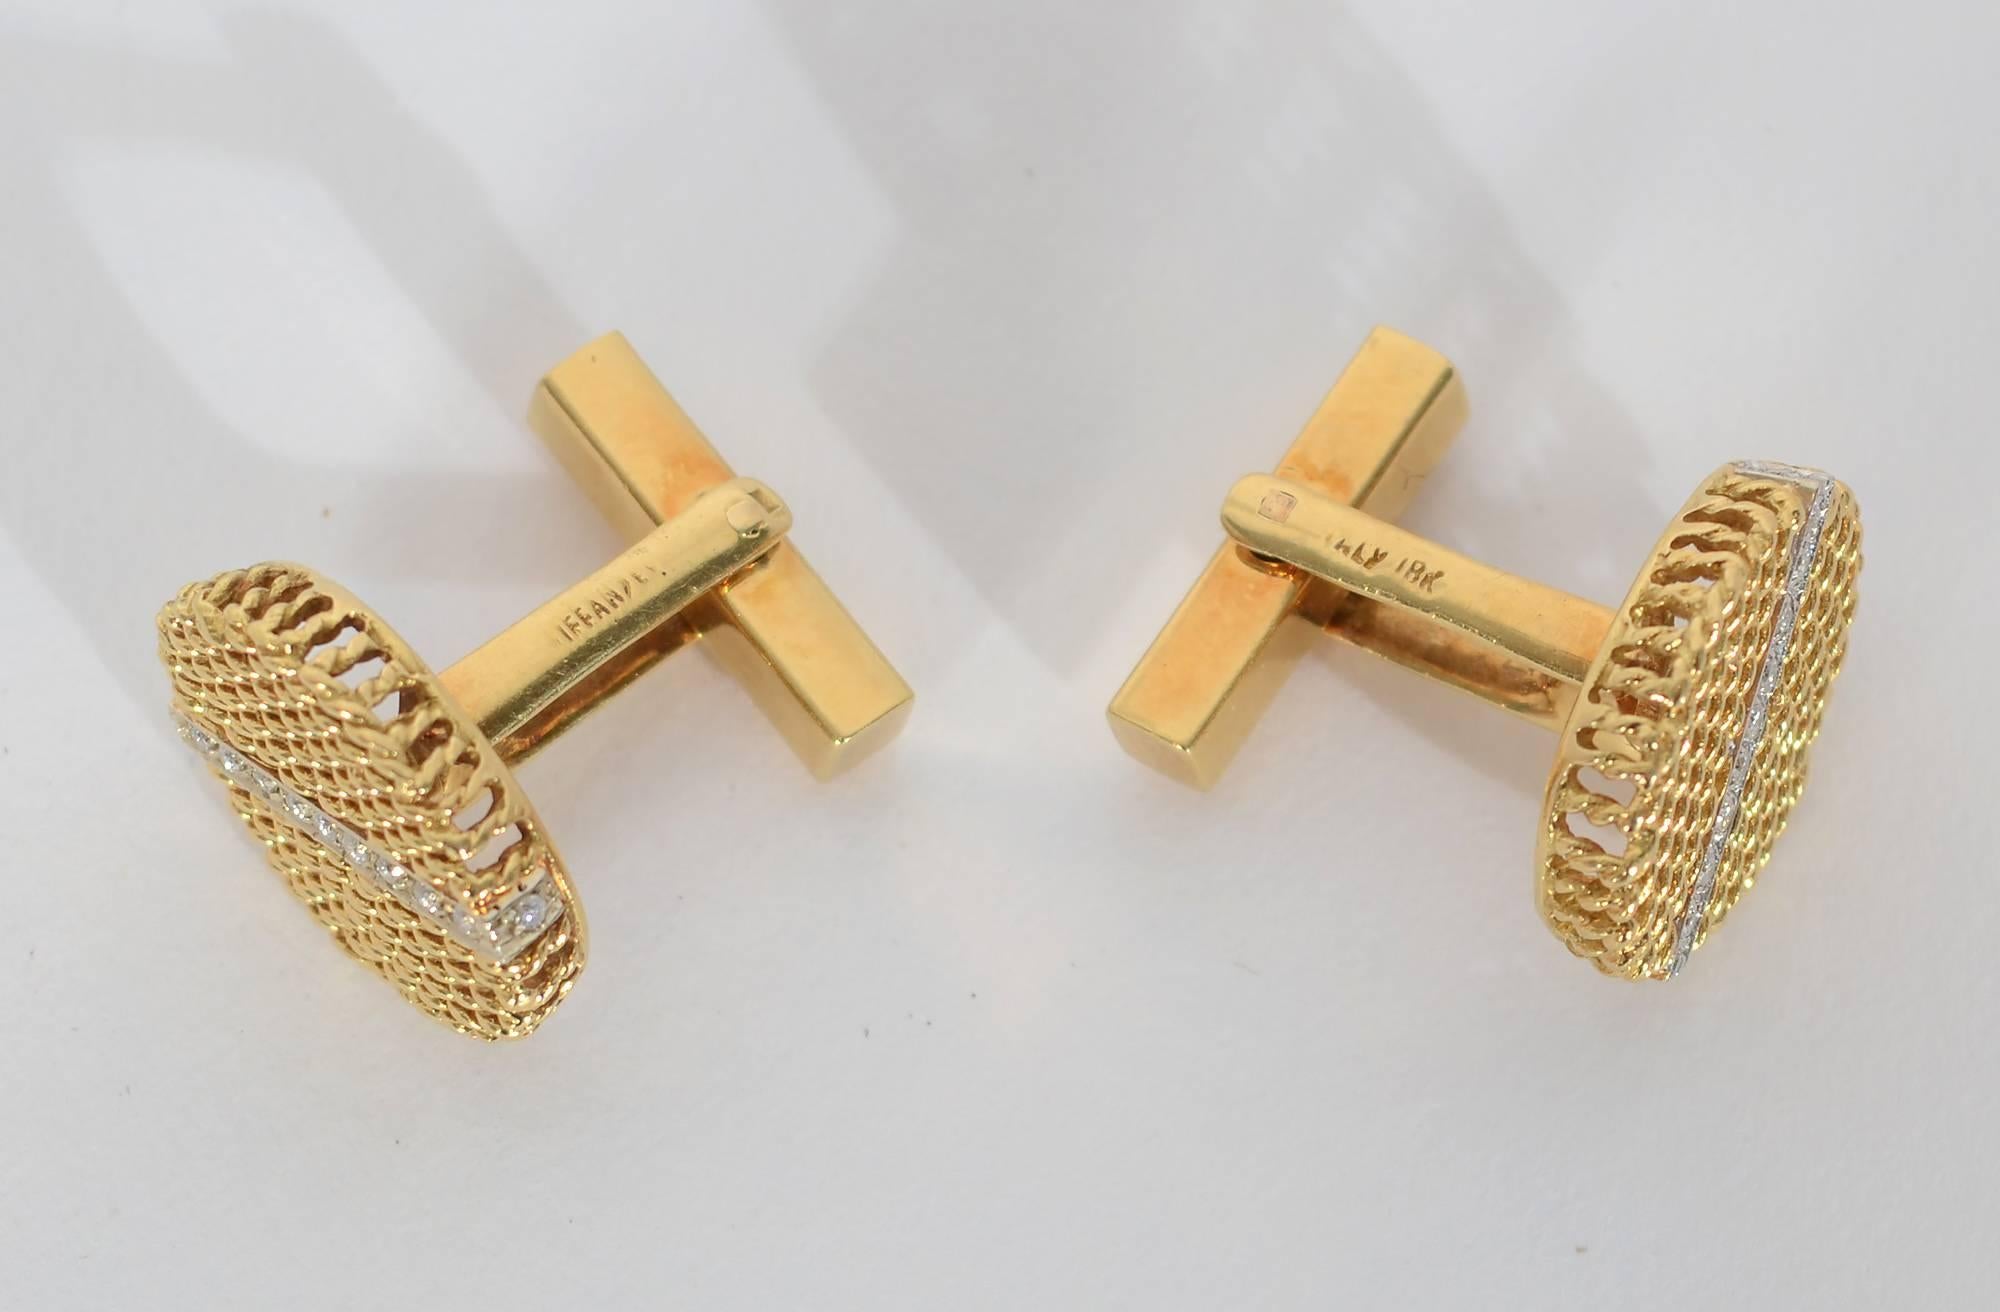 Tiffany oval cufflinks that are nicely tailored with a touch of bling. They are 3/4